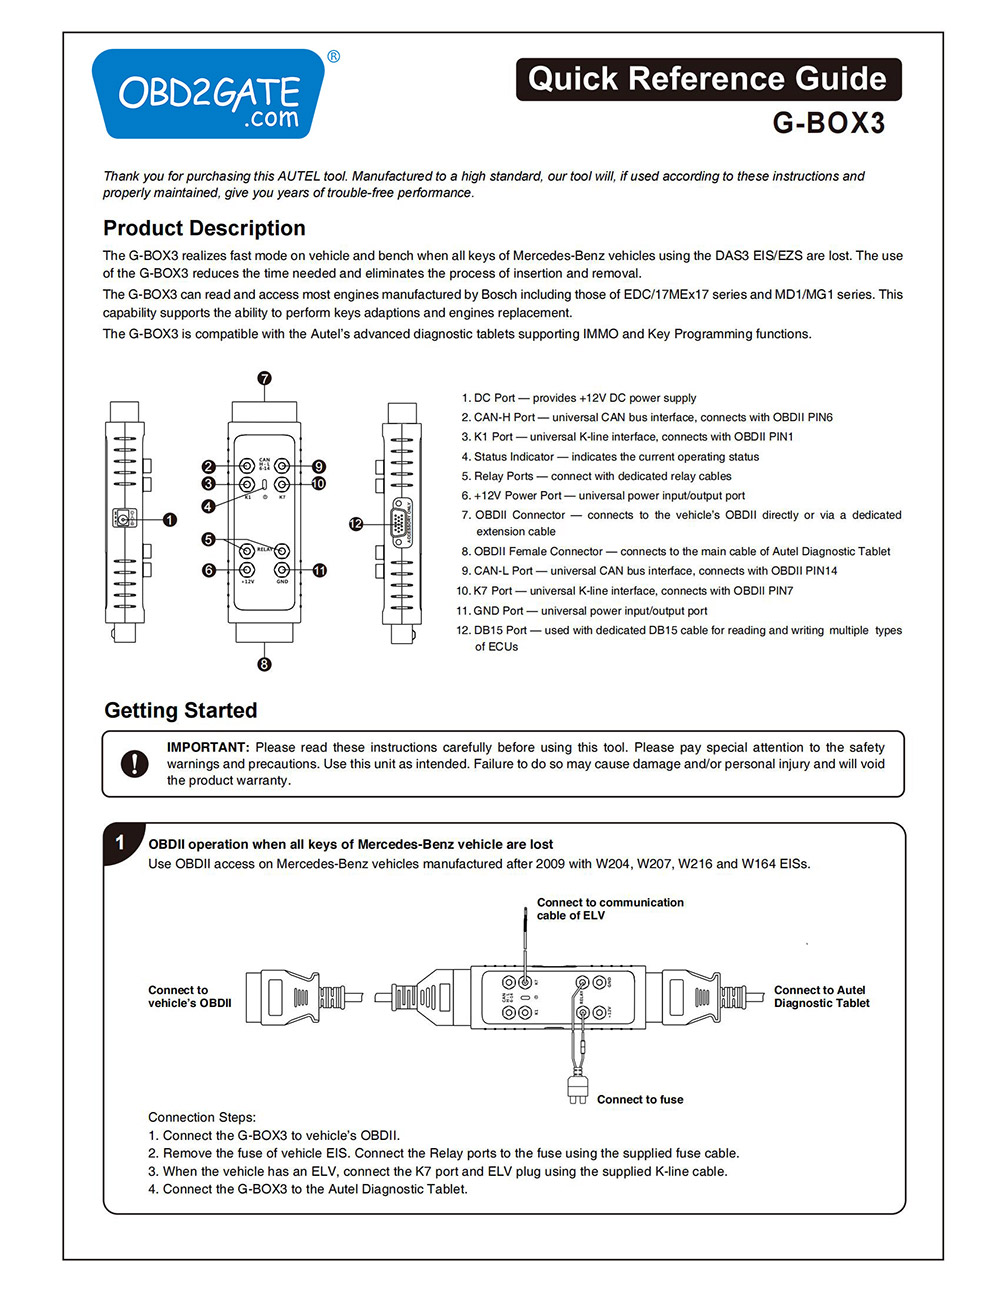 Autel G Box3 Quick Reference Guide-1